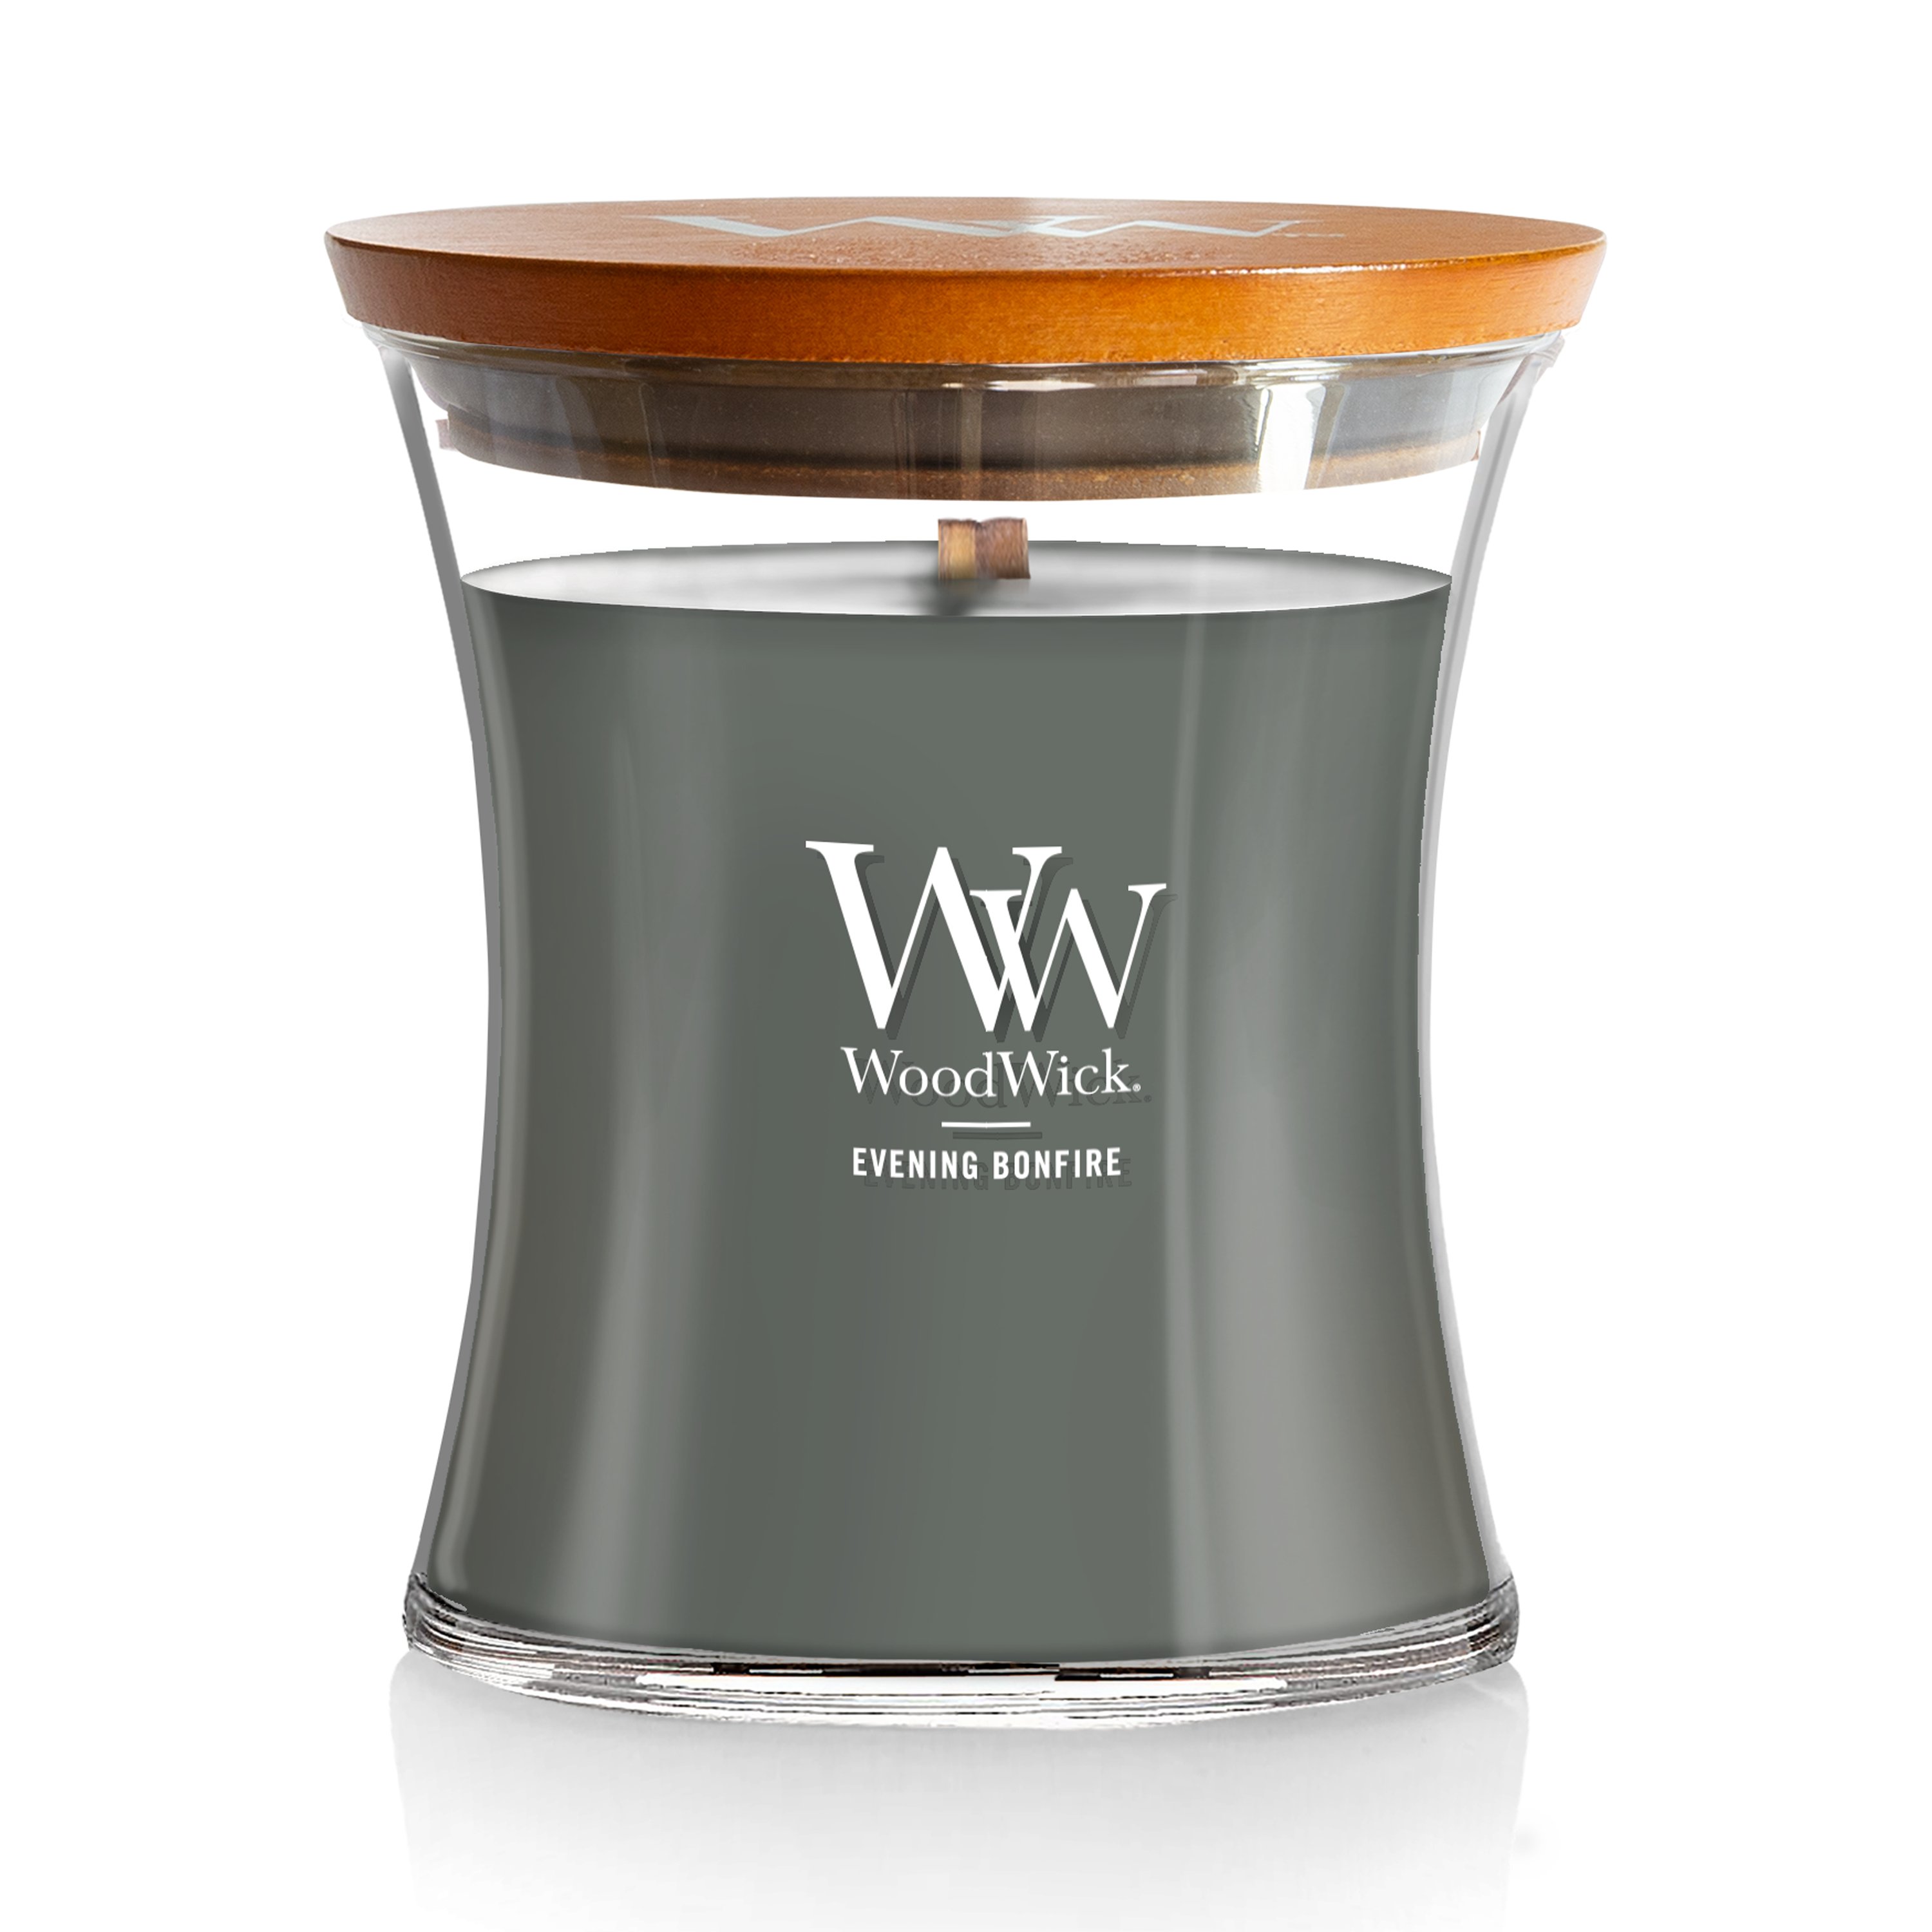  Woodwick Candles